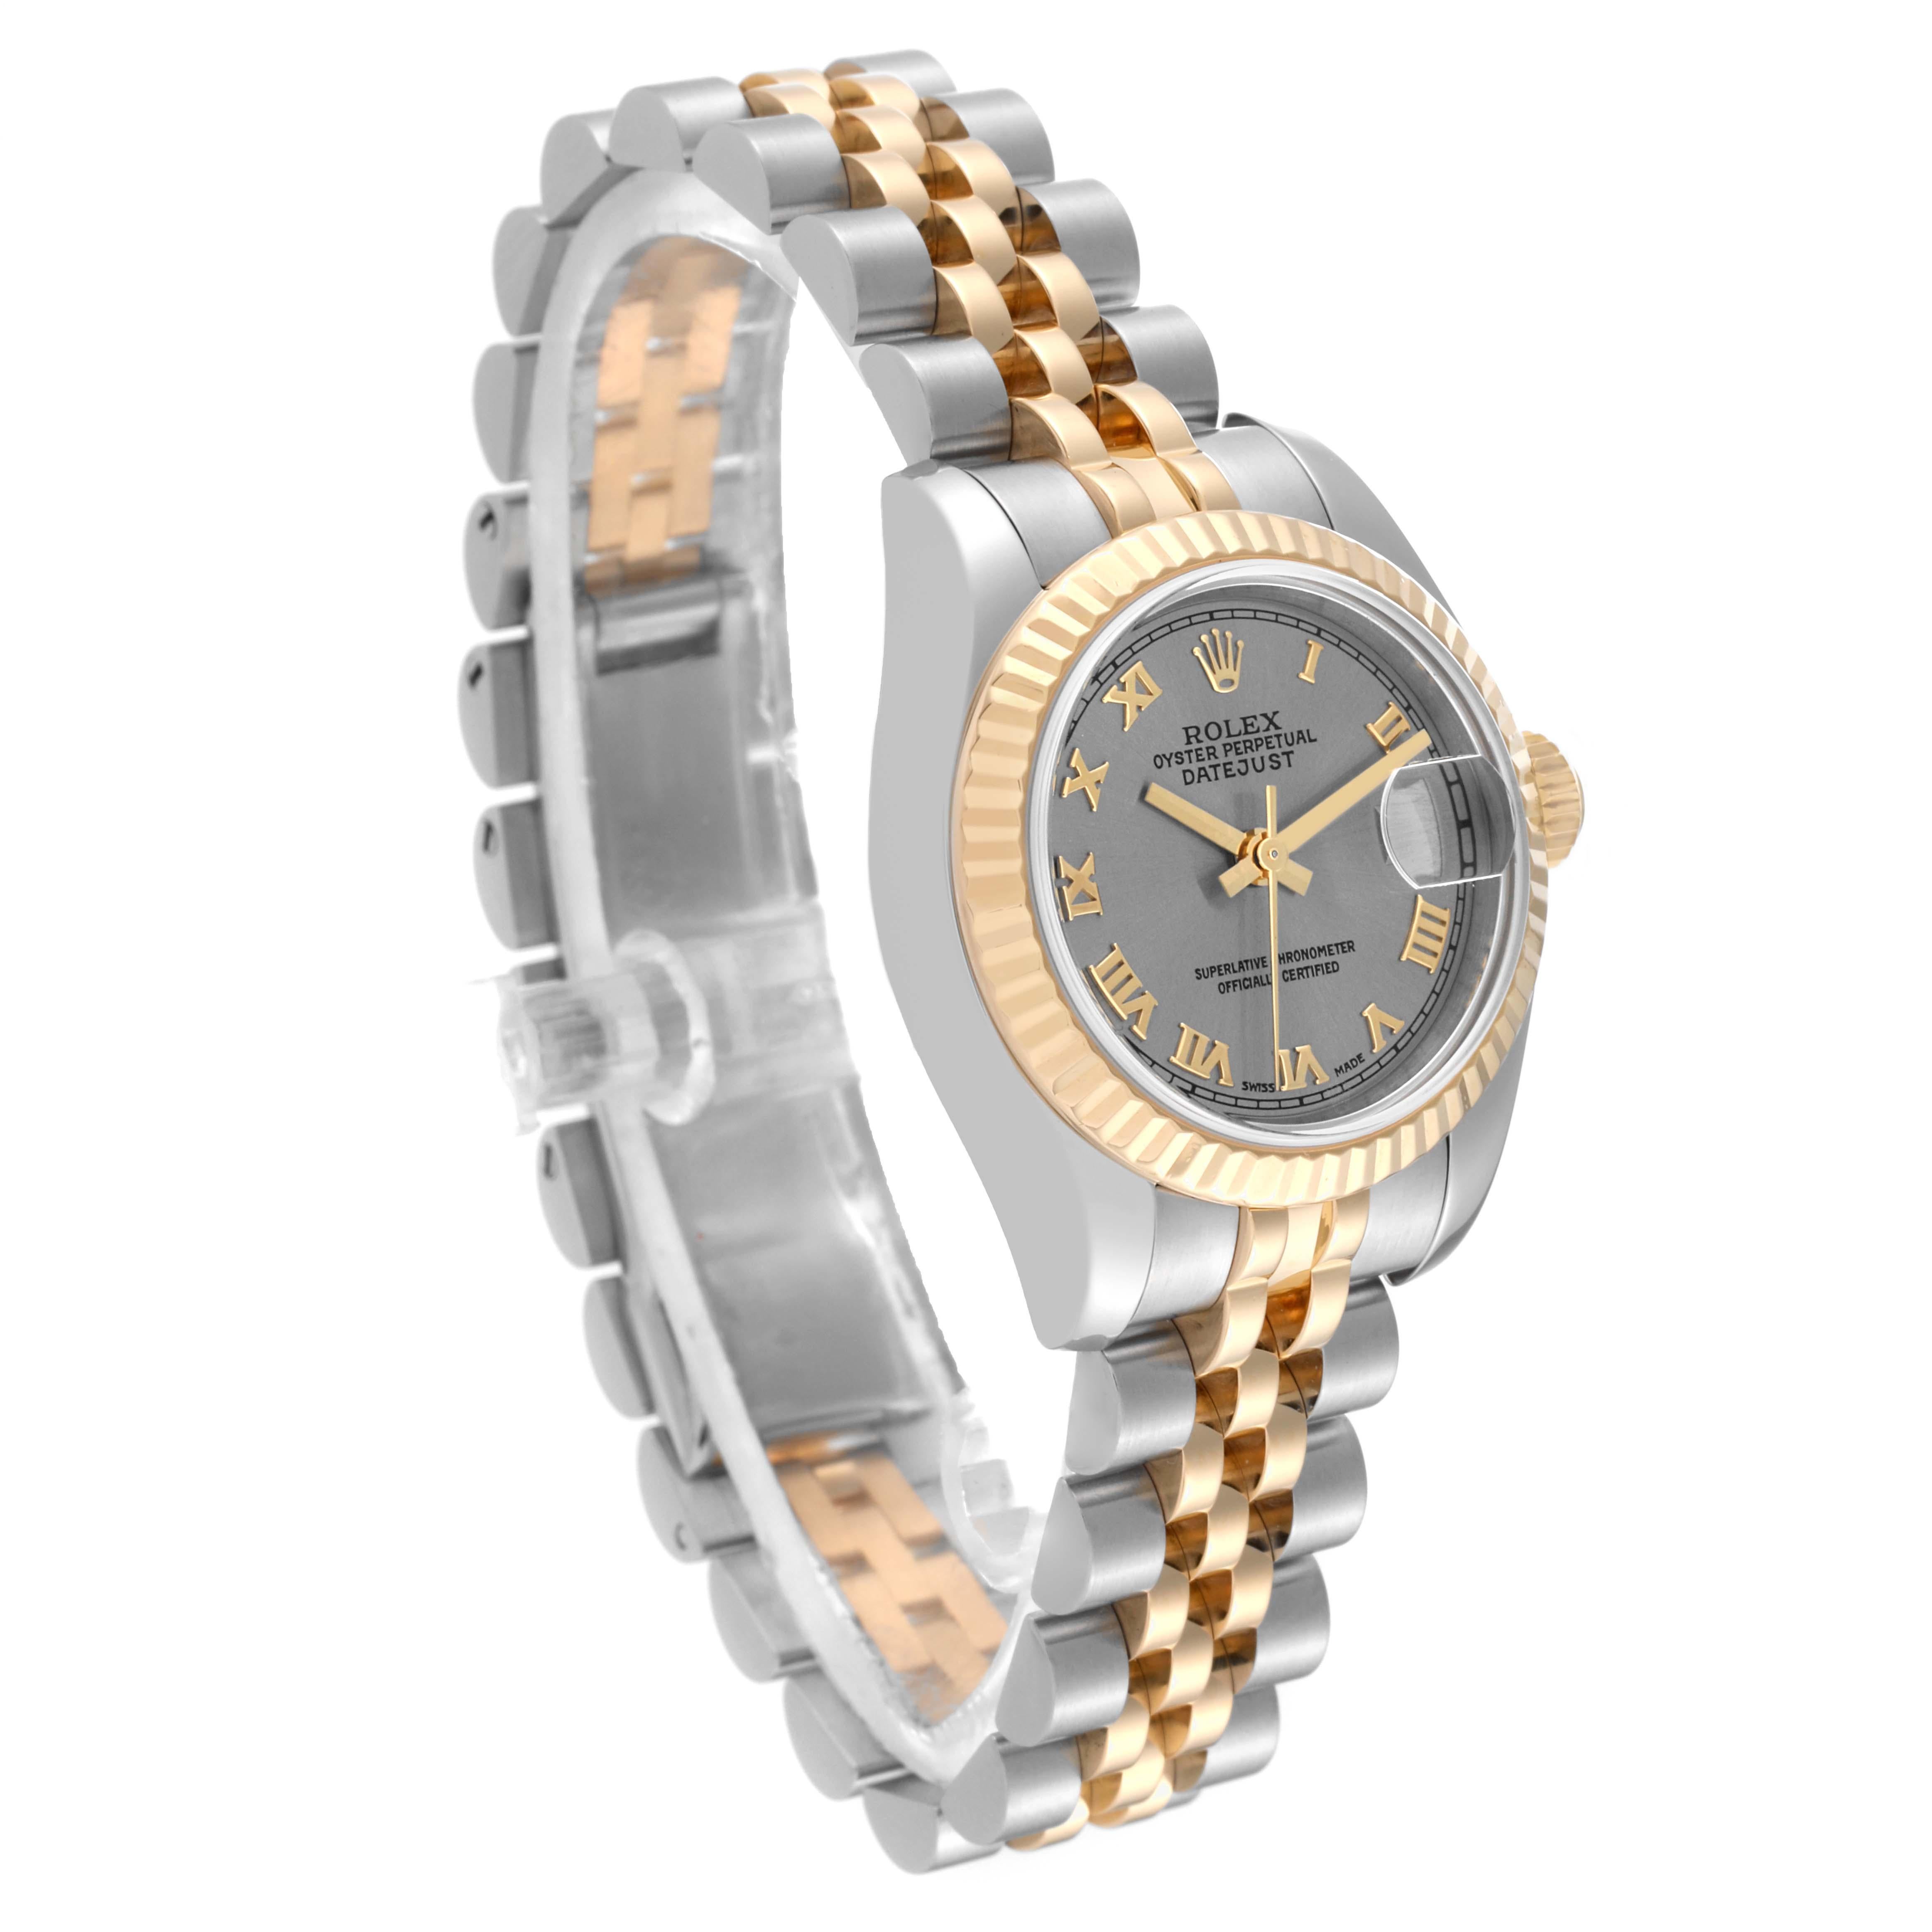 Rolex Datejust Steel Yellow Gold Slate Dial Ladies Watch 179173 Box Card For Sale 5